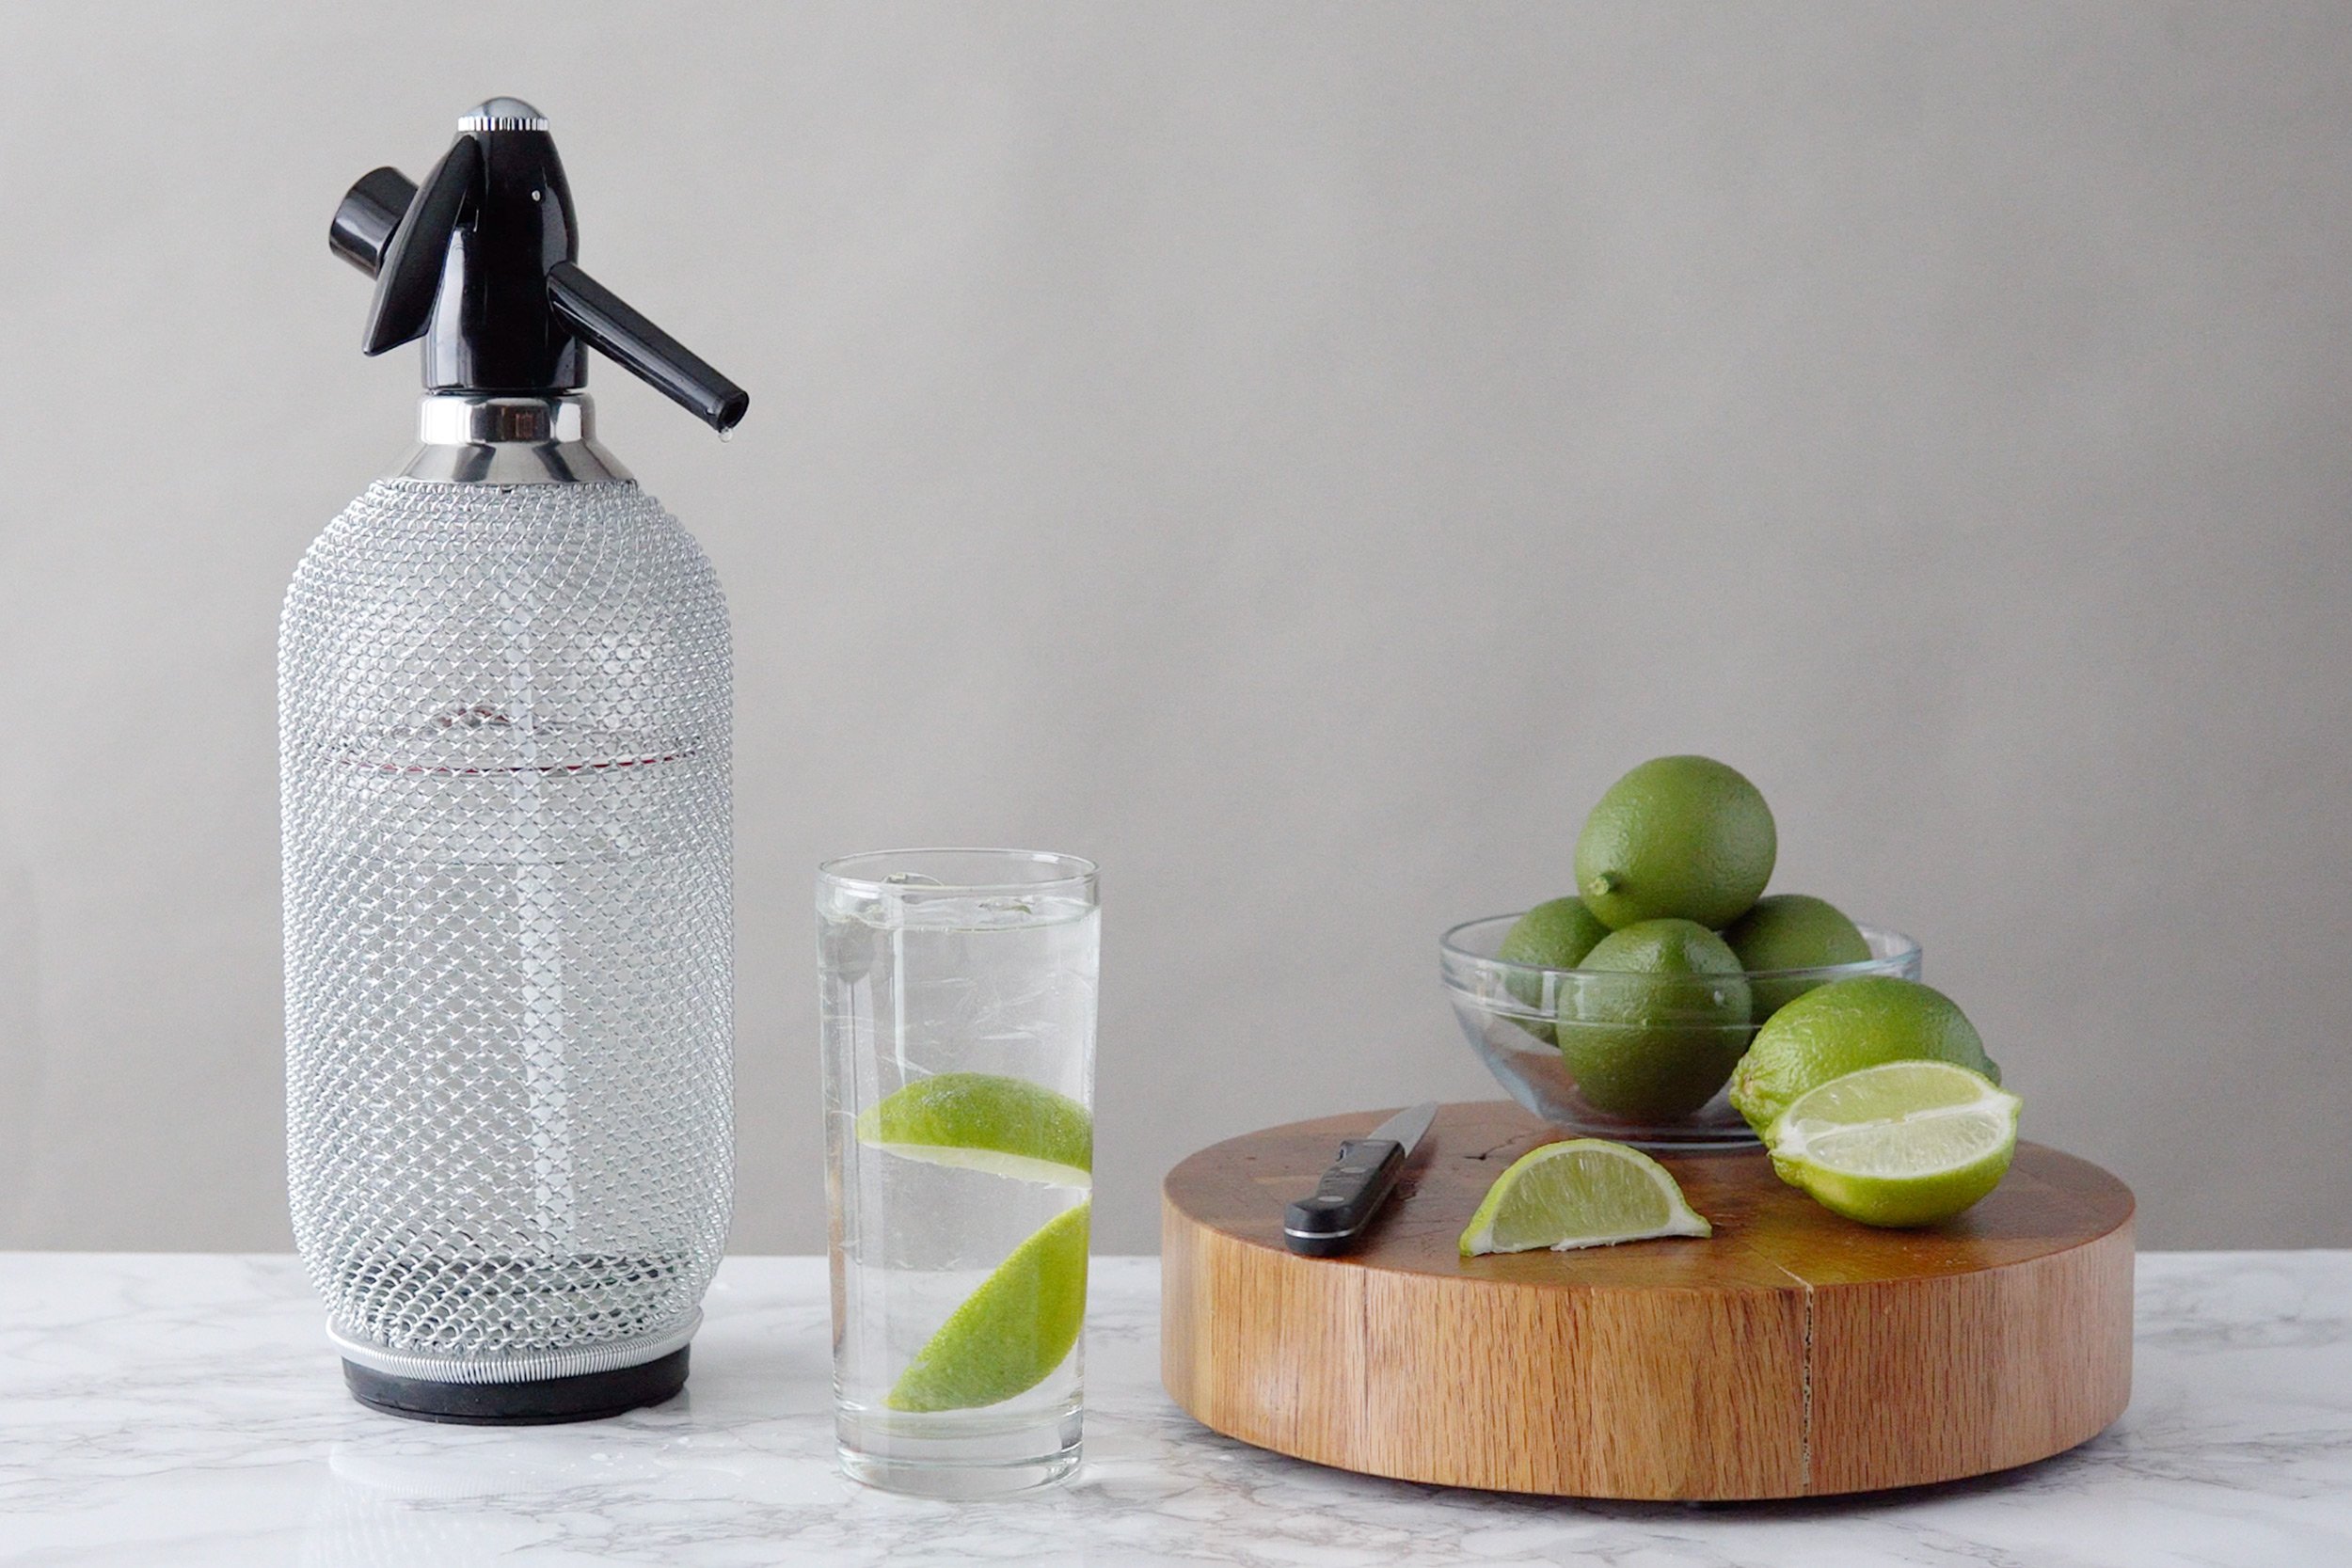 Become A Fizz Wiz: How To Use a Soda Siphon